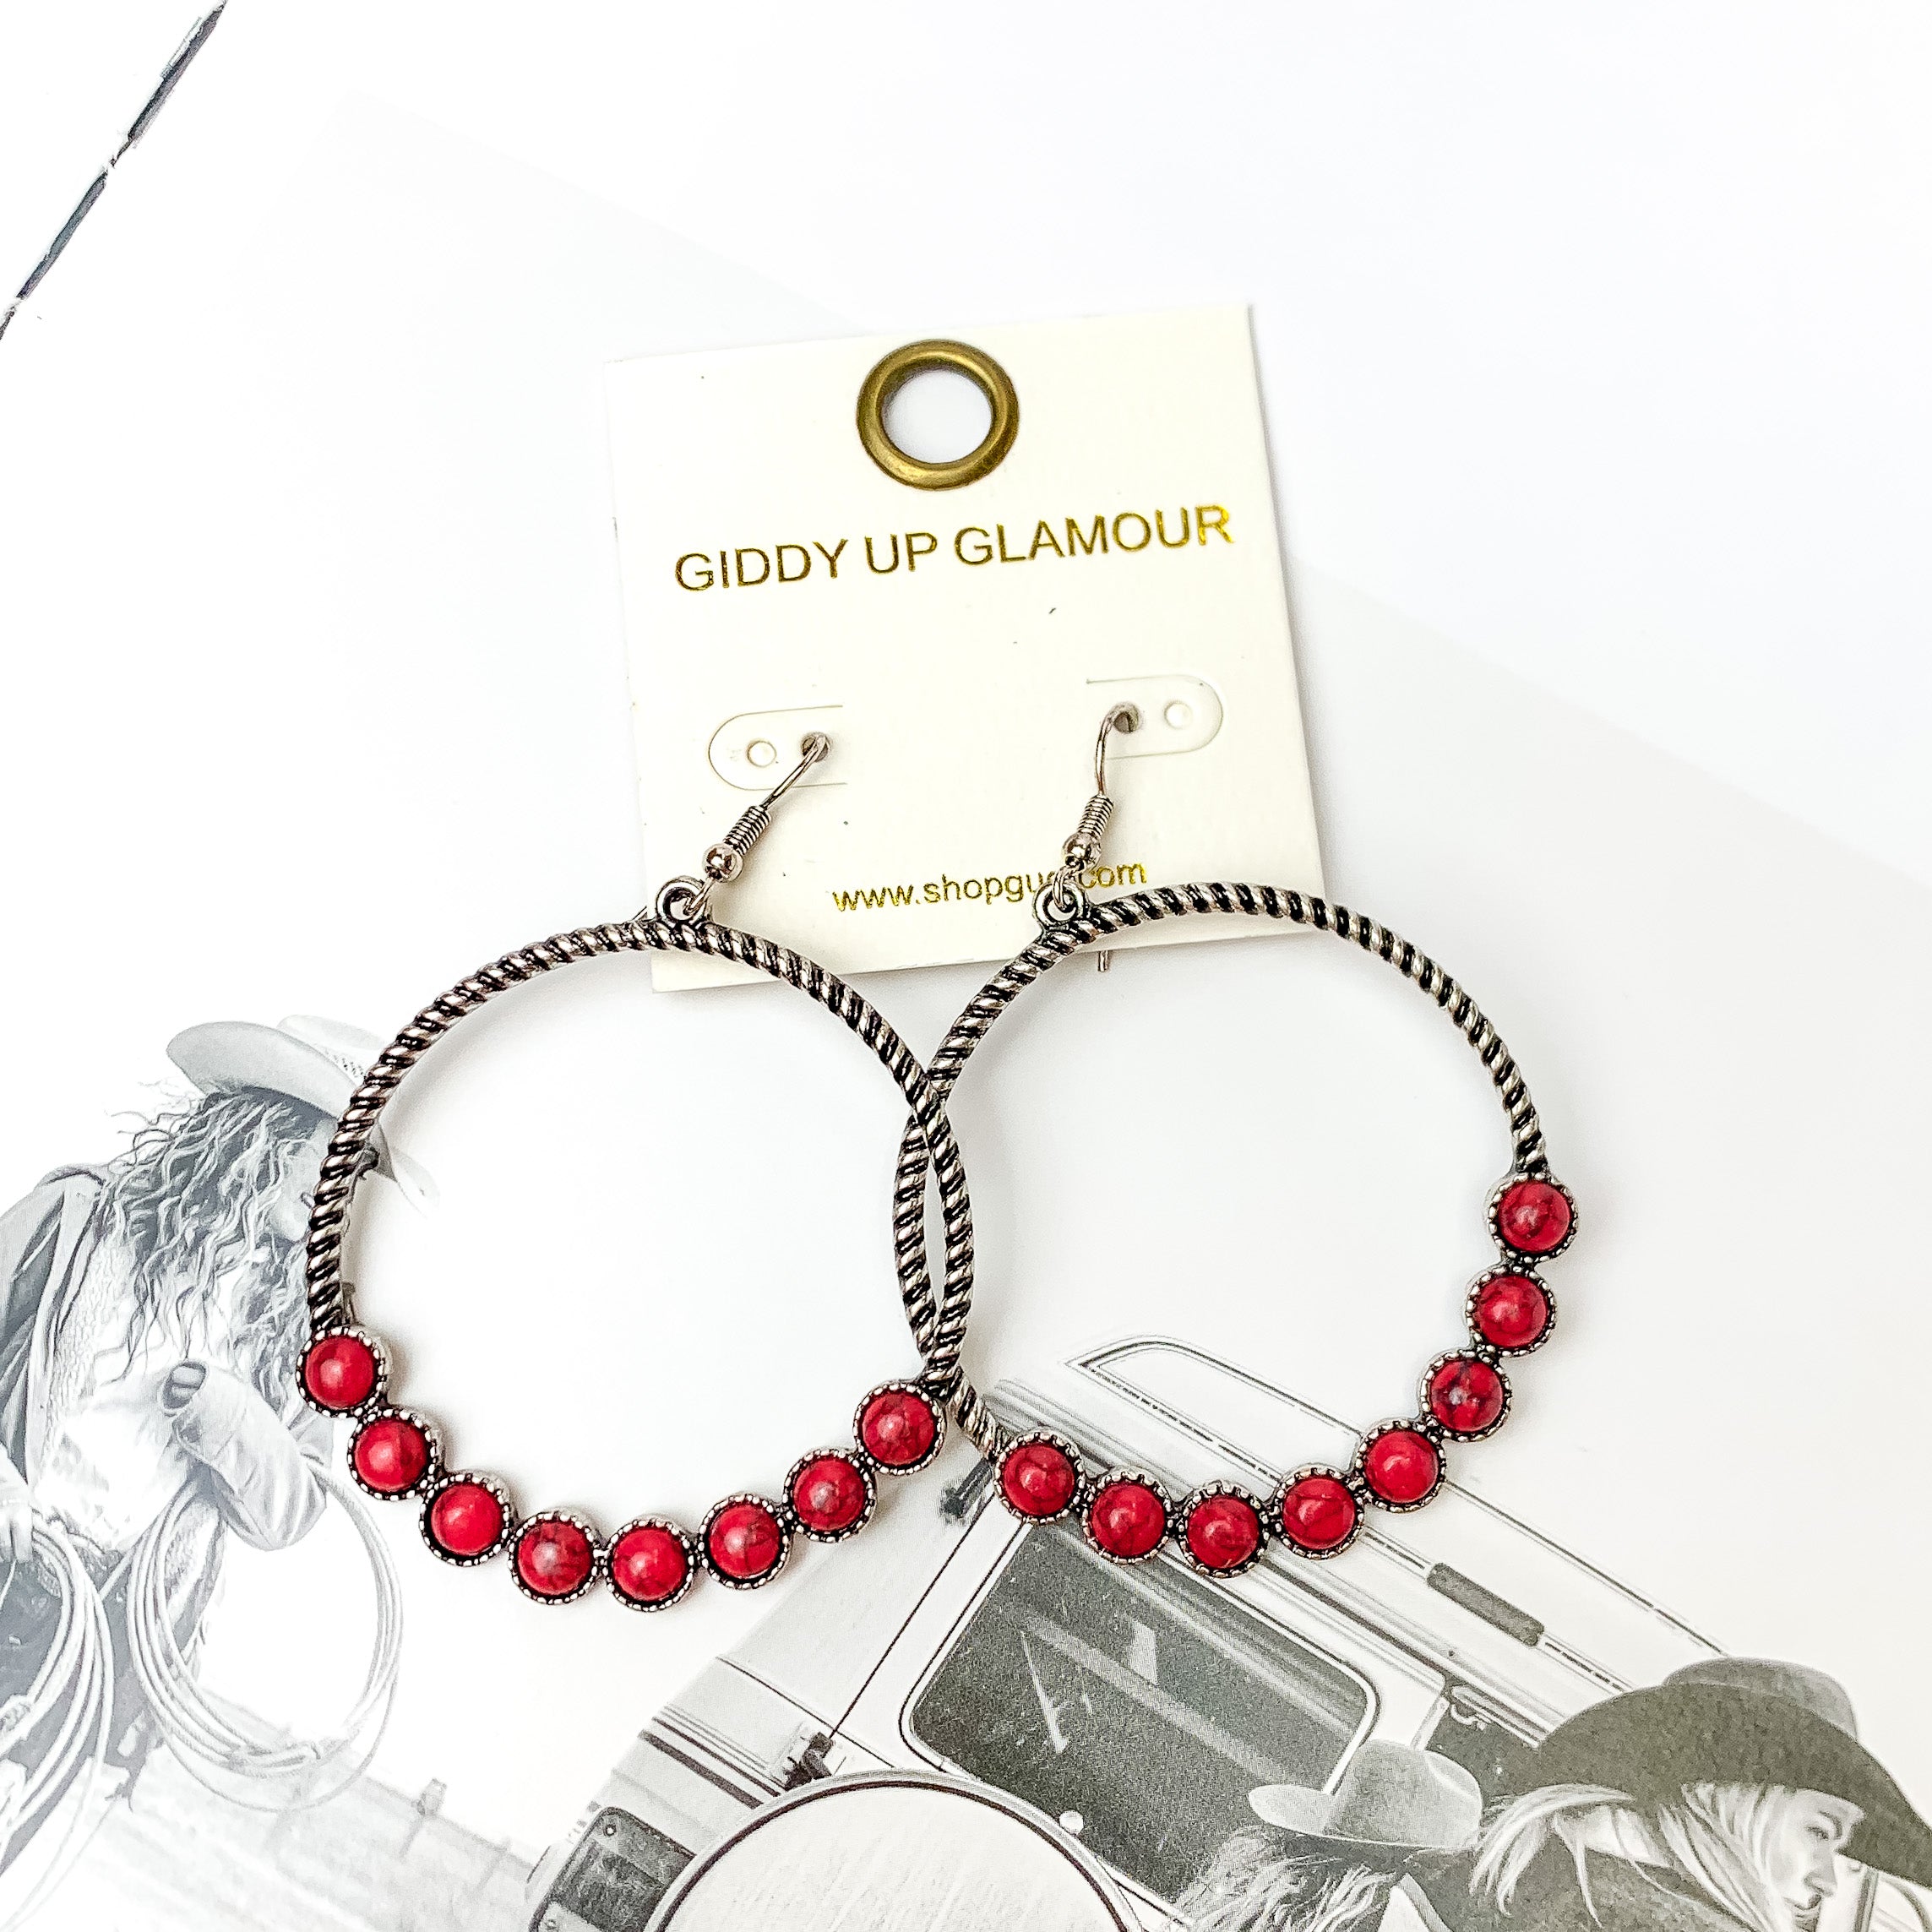 Forever Twisted Hoop Earrings with Stones in Red - Giddy Up Glamour Boutique